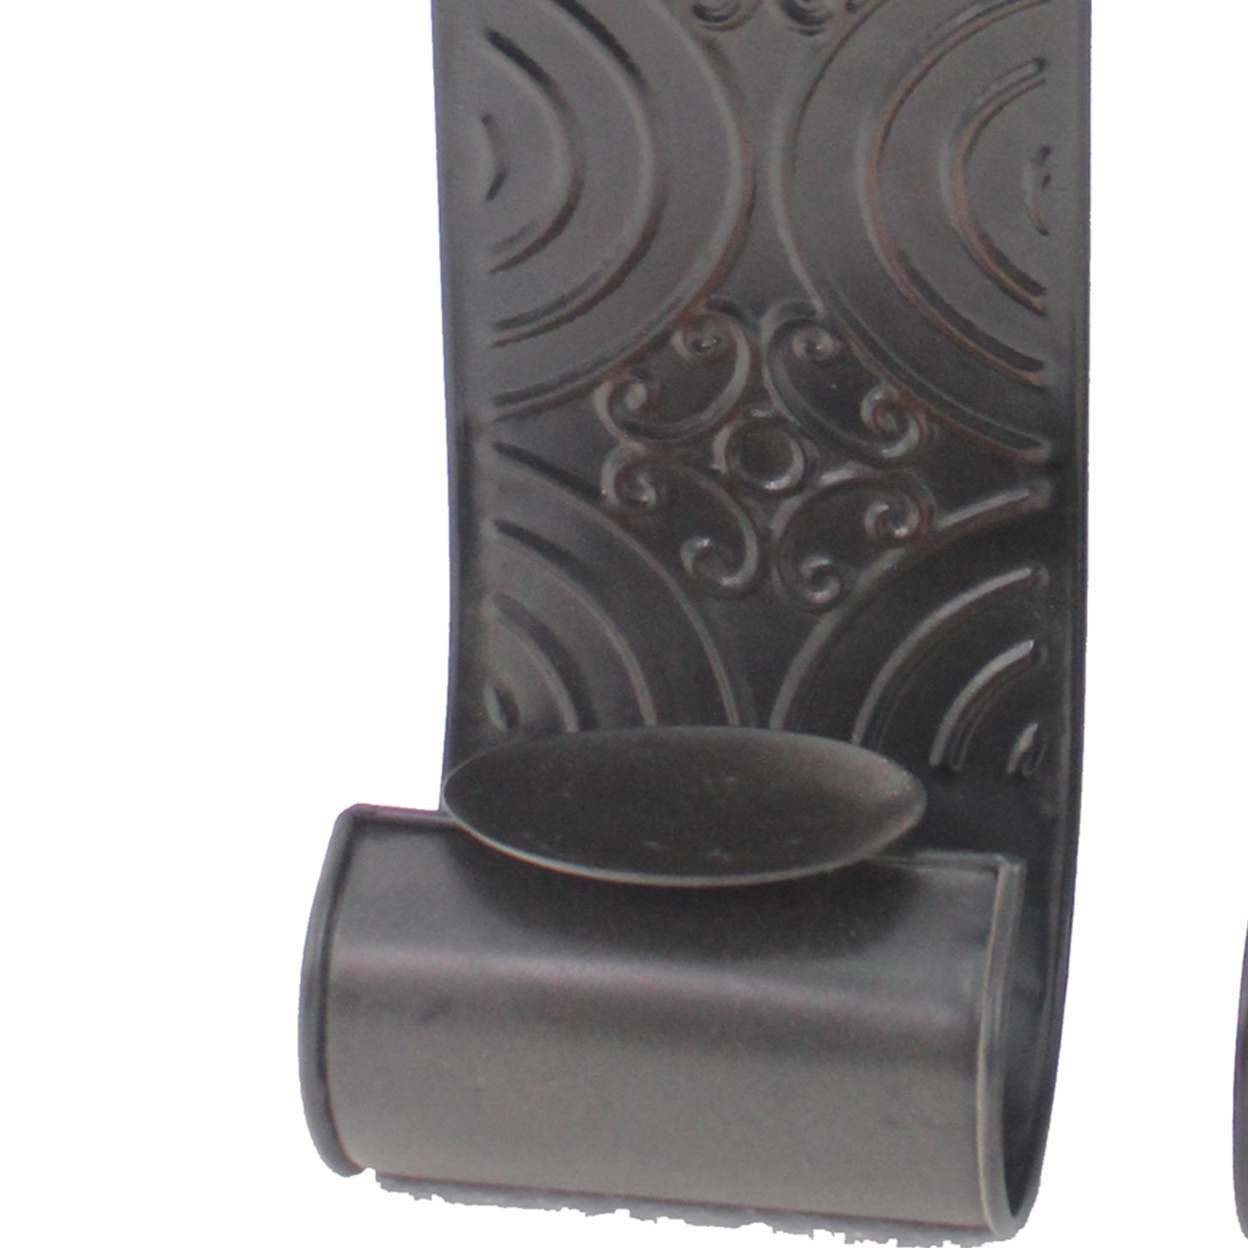 Metal Sconce Candle Holder With Embossed Intricate Carvings, Bronze- Saltoro Sherpi